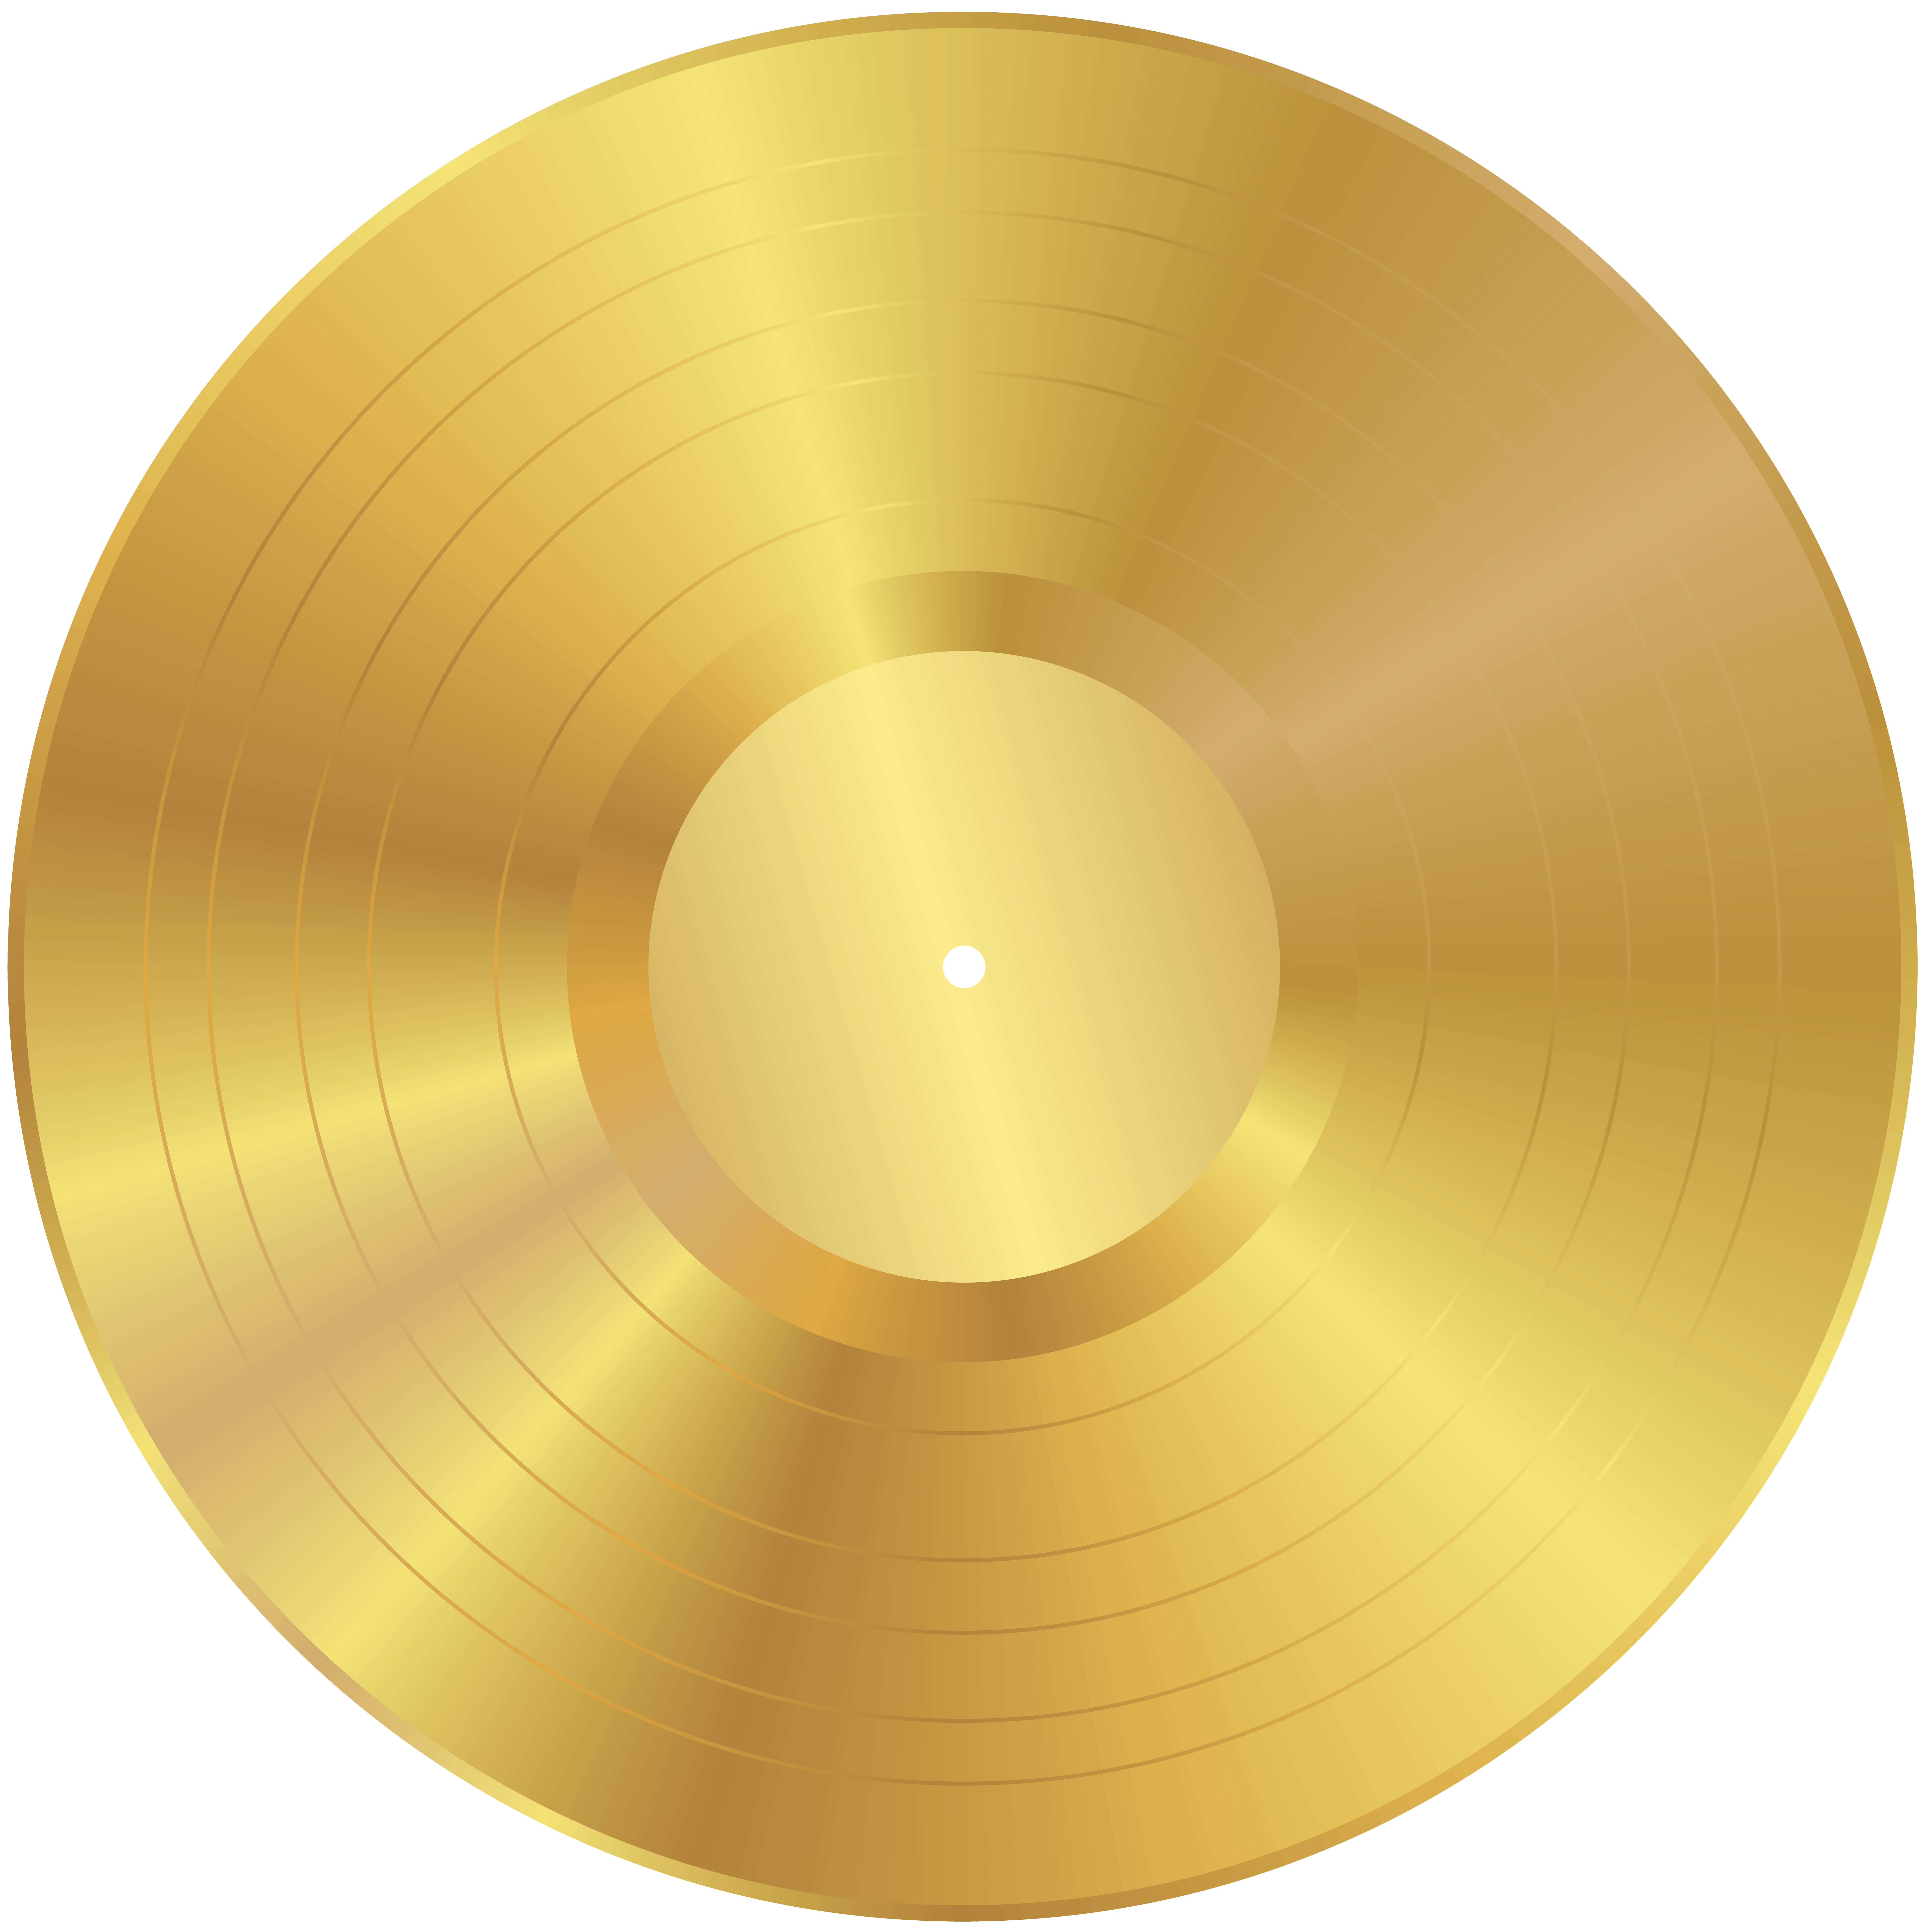 gold vinyl record png clip art image gallery yopriceville high quality images and transparent png free clipart